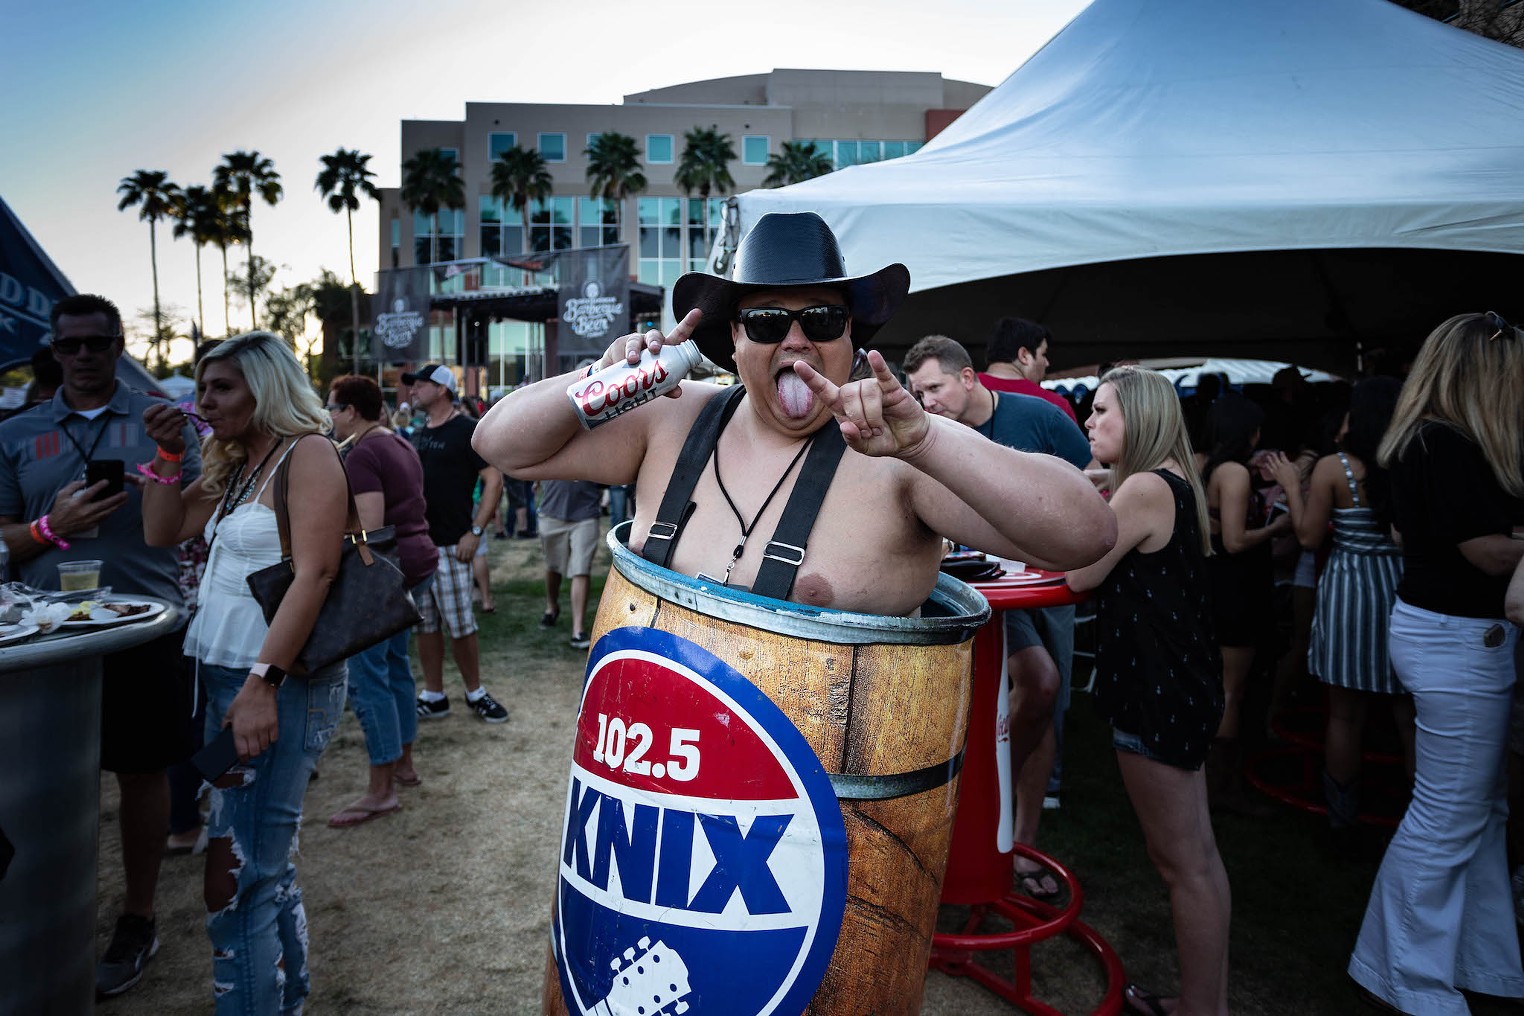 102.5 KNIX Great American Barbecue & Beer Festival